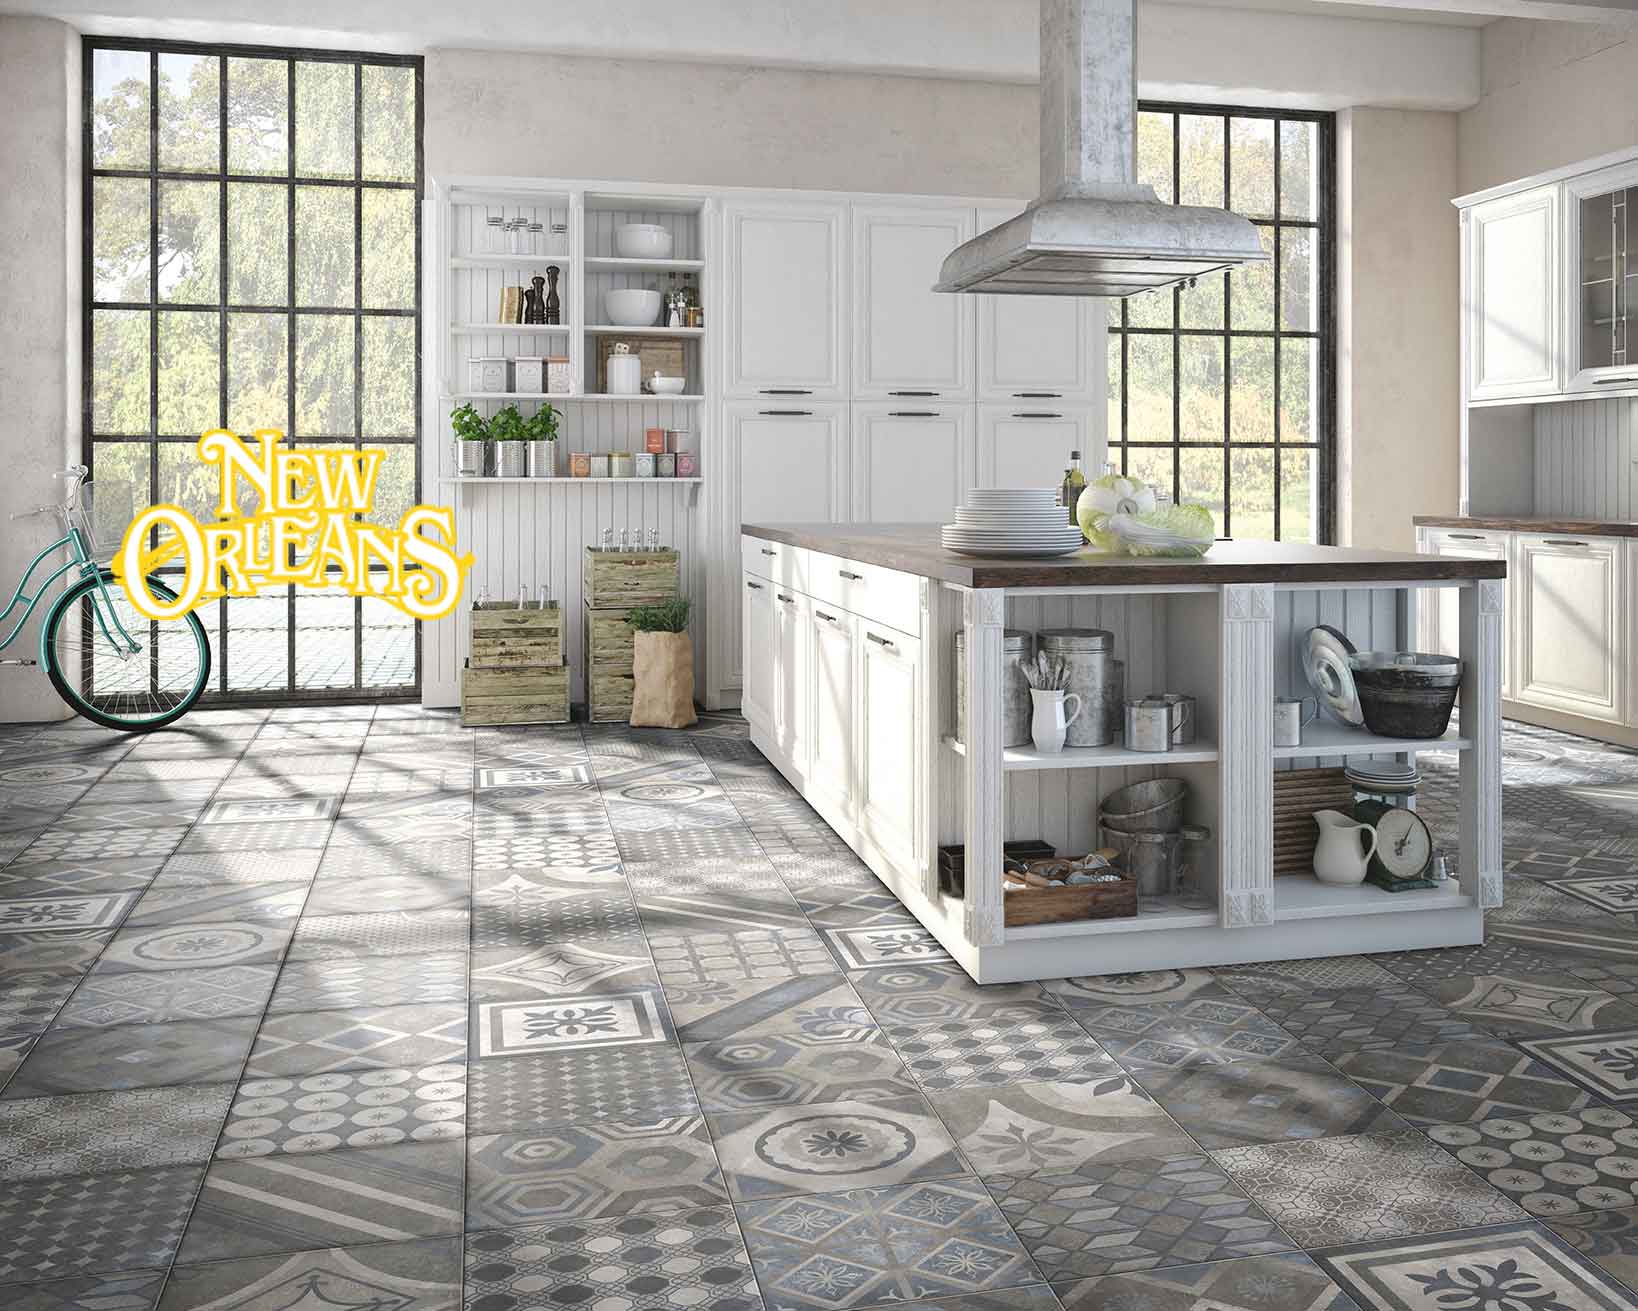 Suppliers of Ceramica Cir Milano Floors Tiles for Residential Buildings